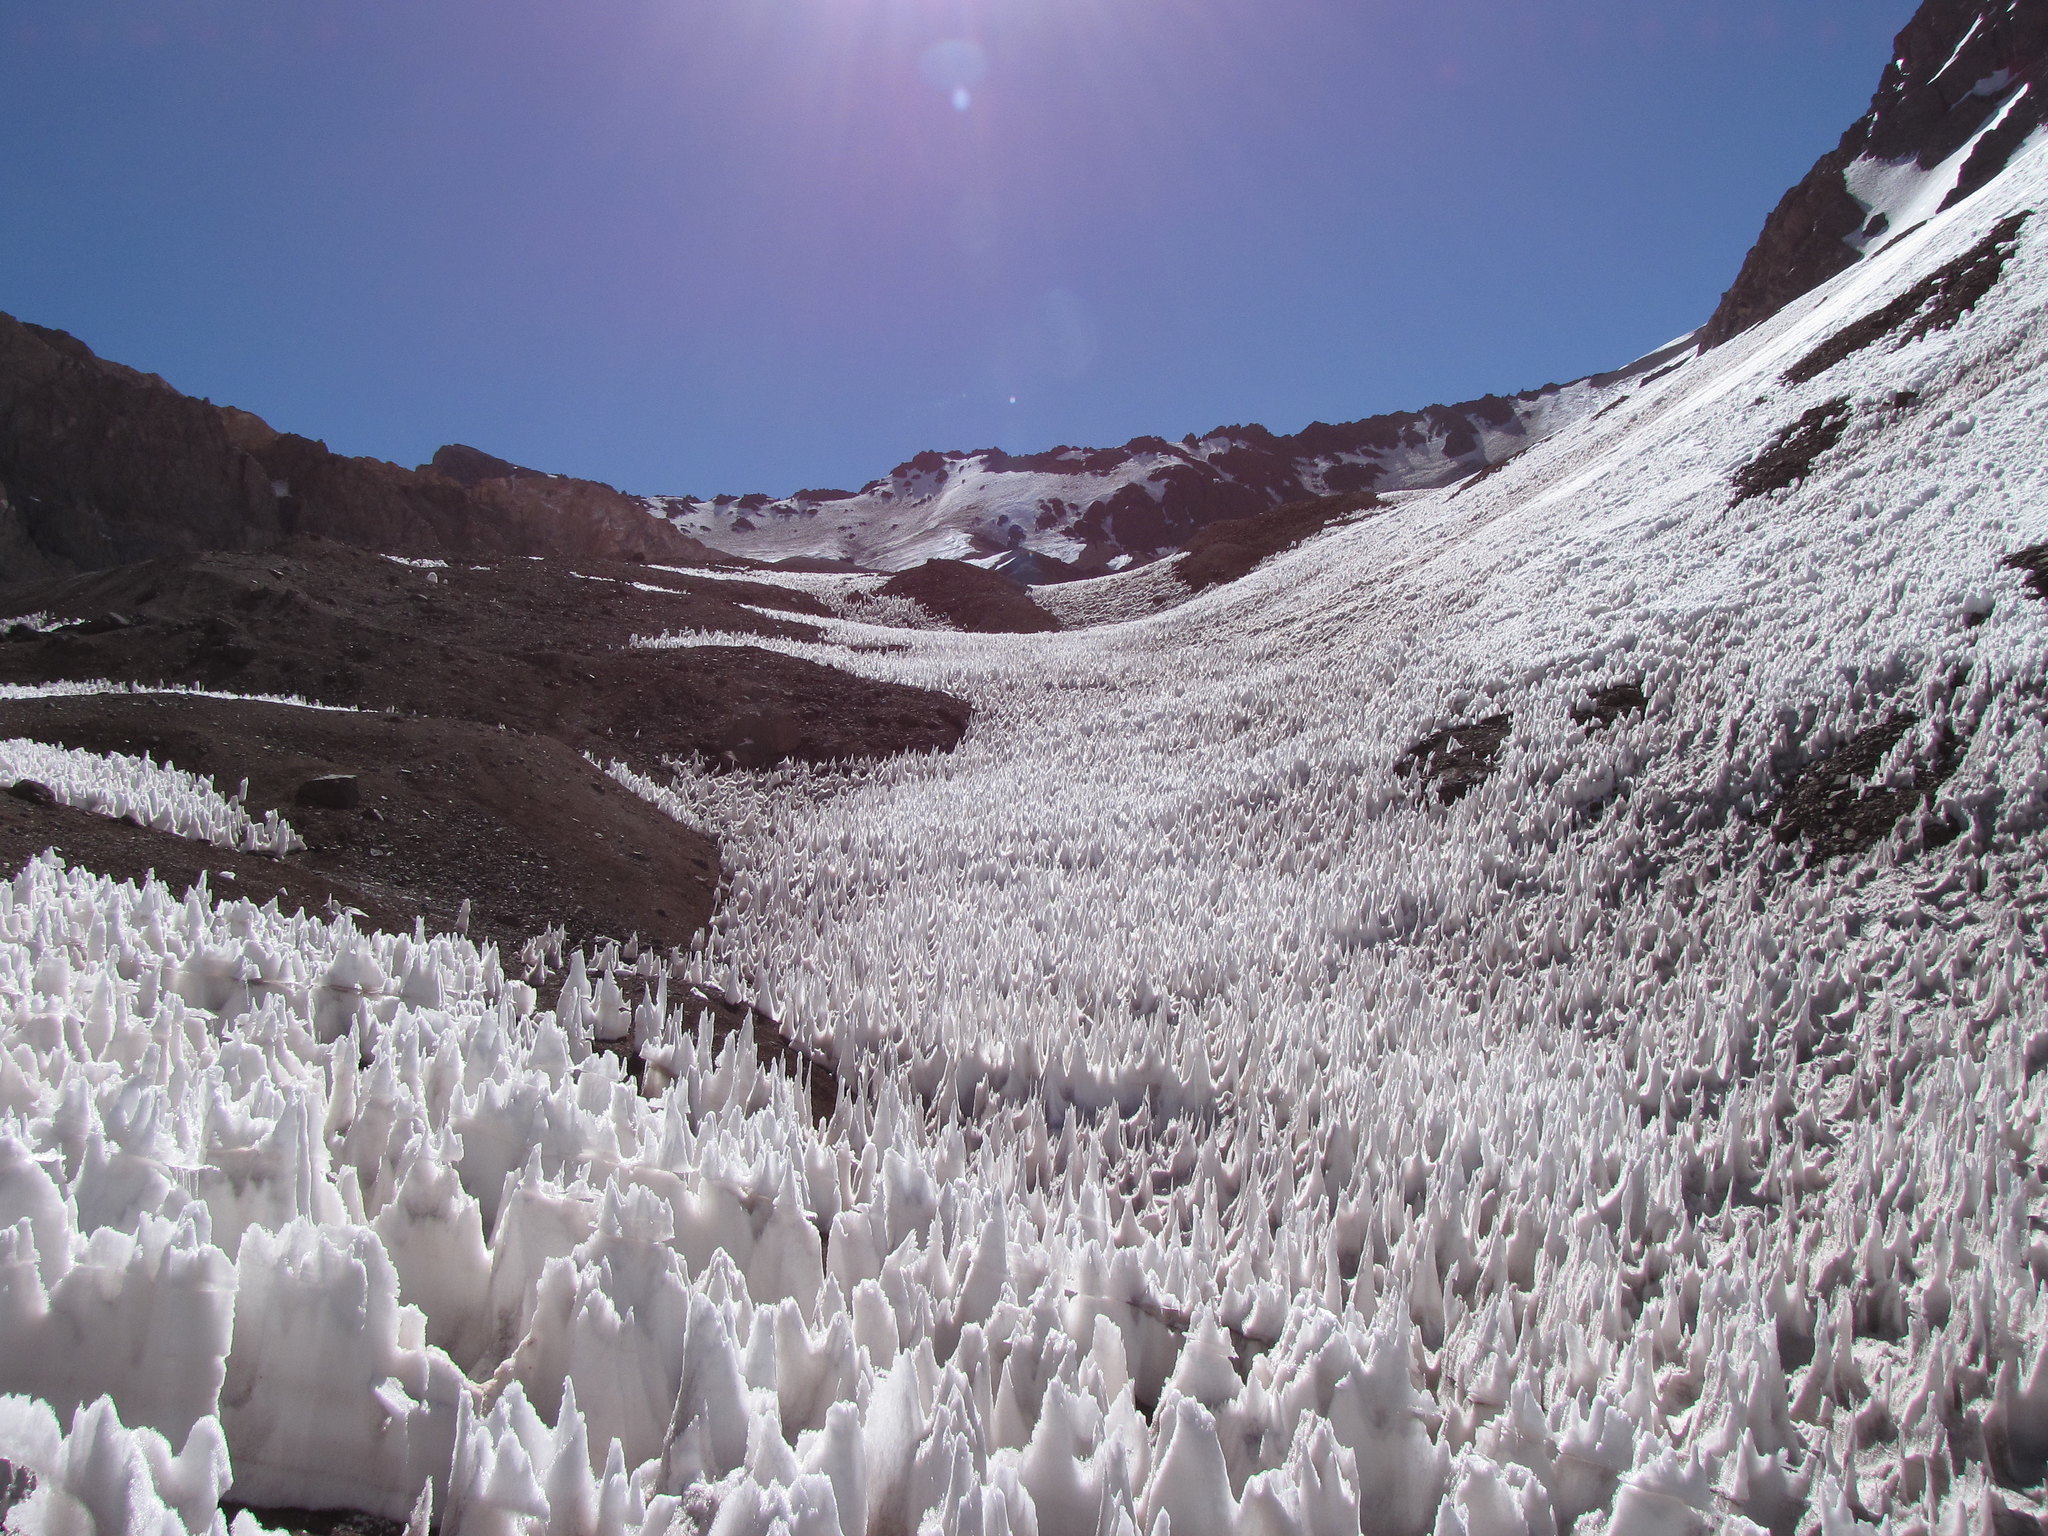 Penitentes, spiked ice structures, on a mountain. 